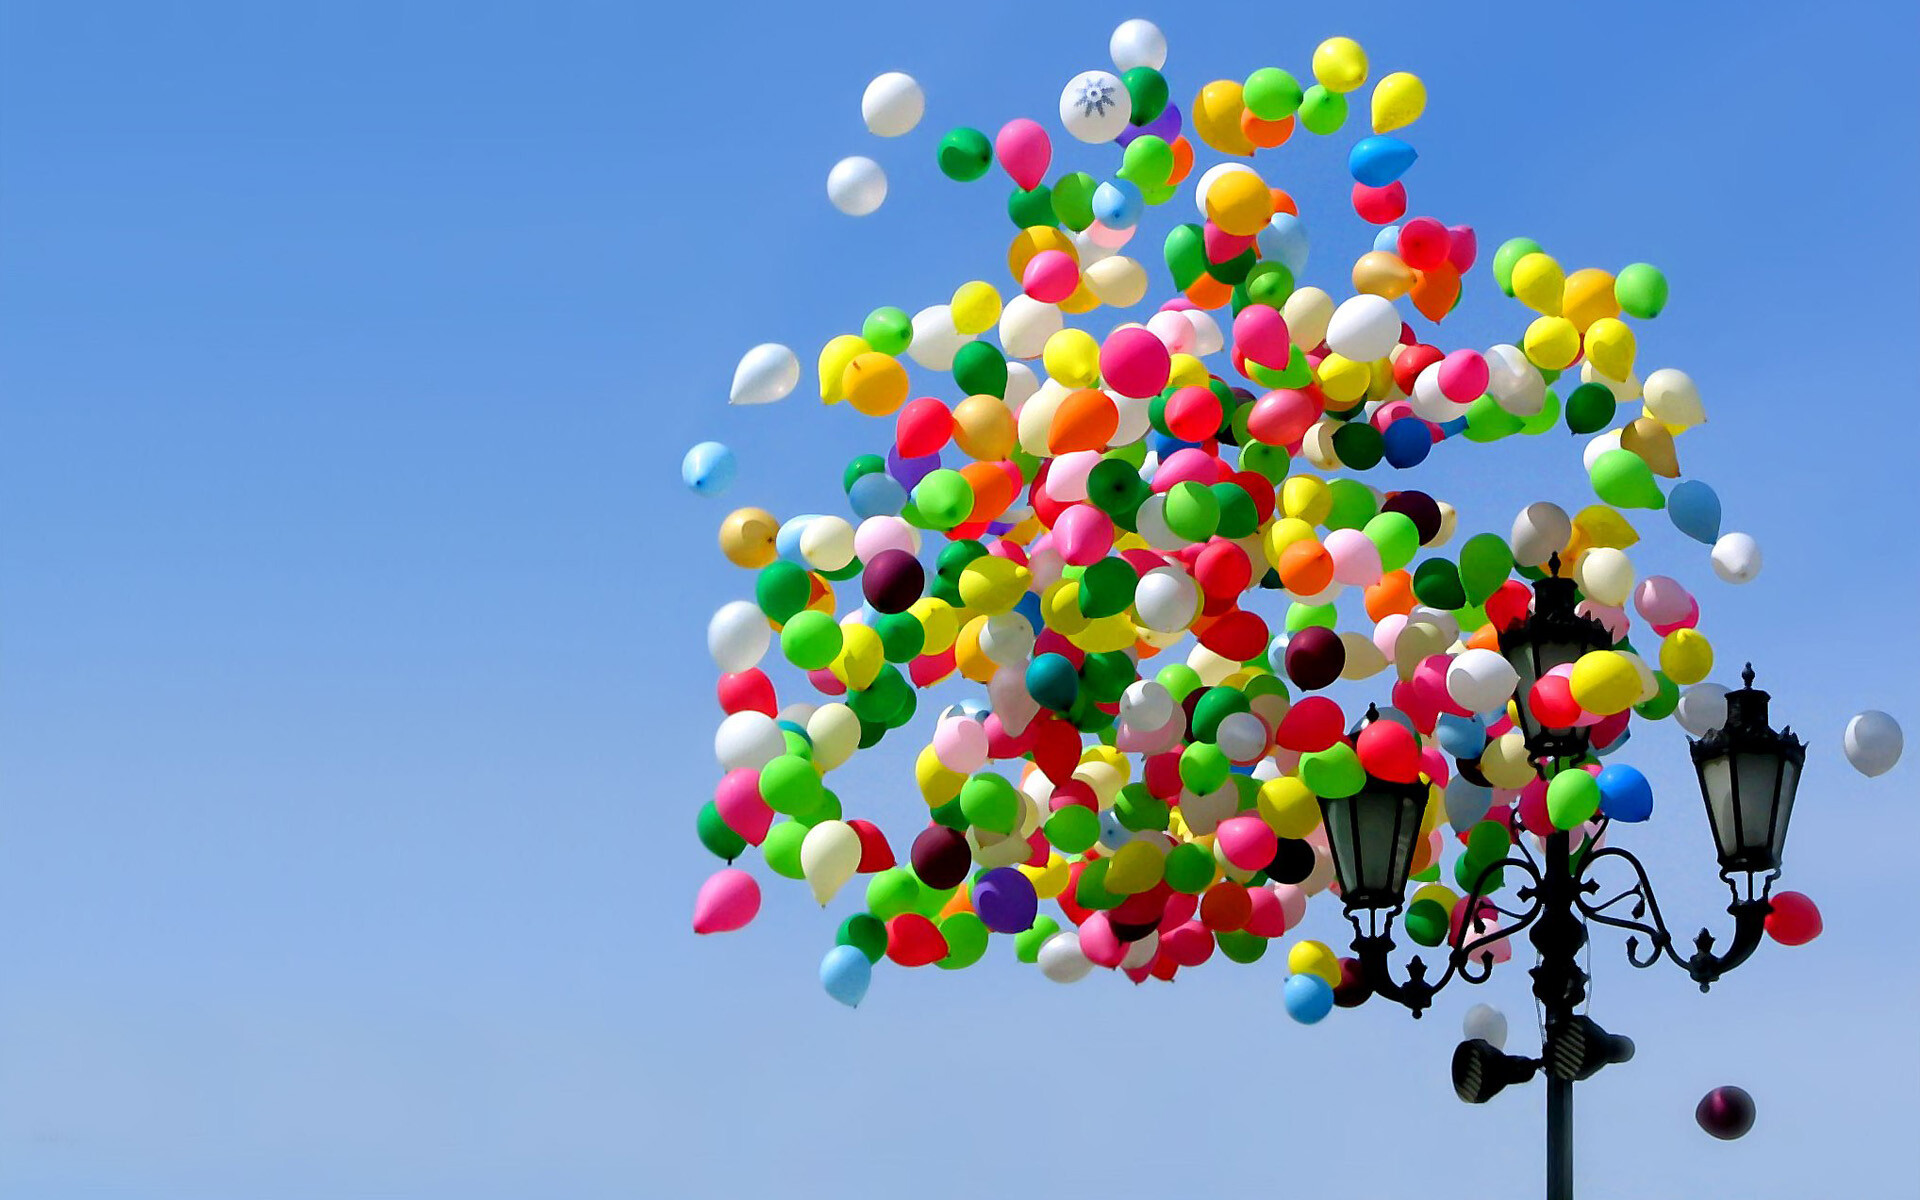 Balloons: The first modern rubber gasbags on record were made by Michael Faraday in 1824. 1920x1200 HD Wallpaper.